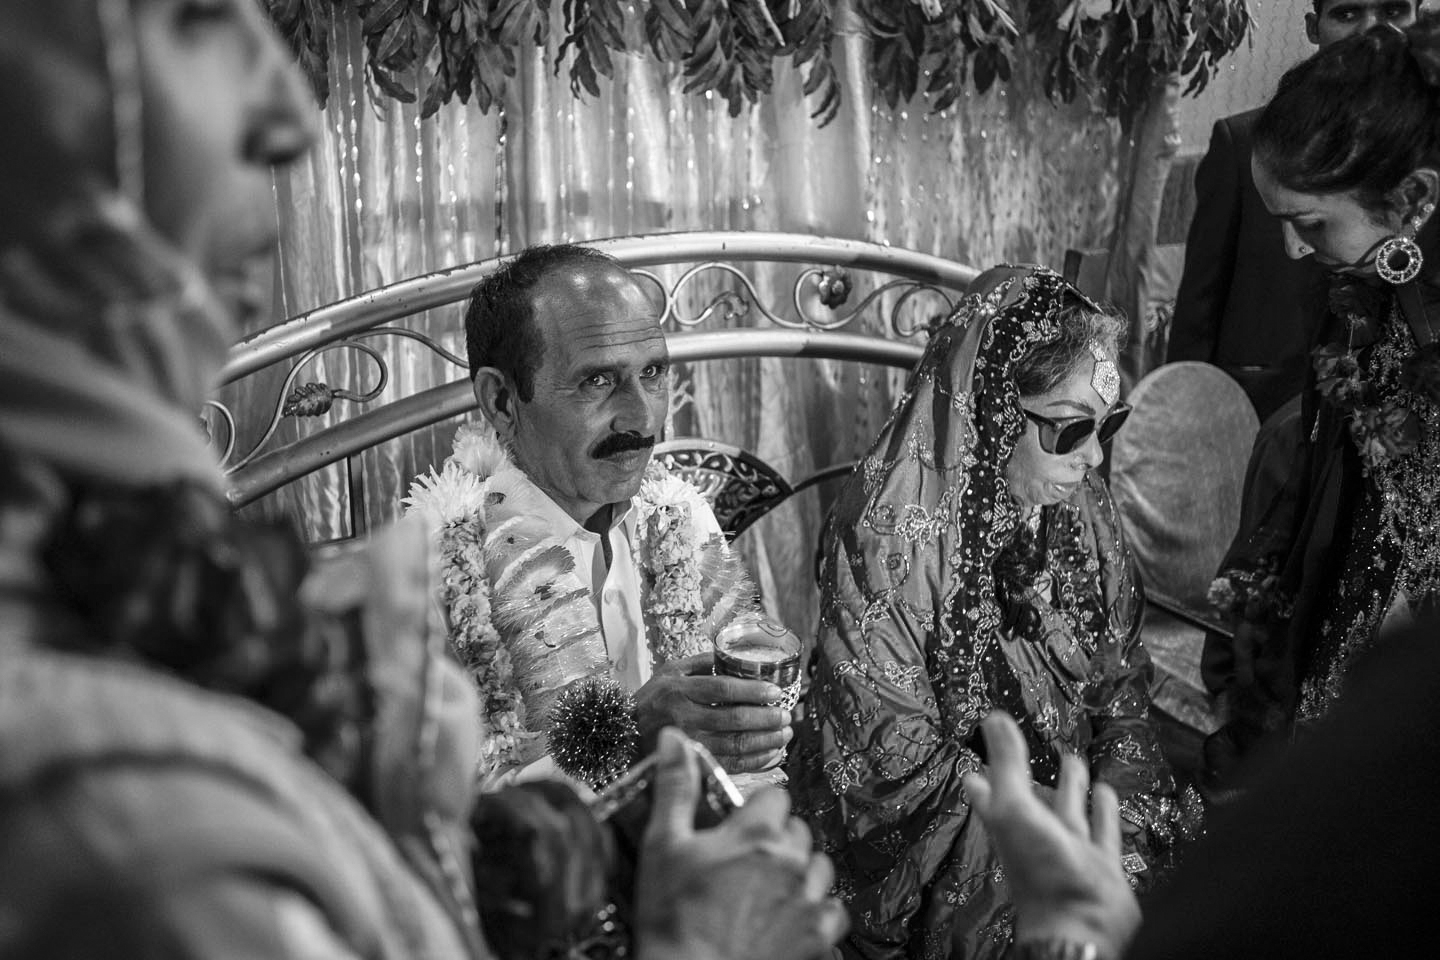  Arshad Ali (Left) sips milk as part of a wedding tradition at the ceremony on Jan. 7, 2016 in Lahore, Pakistan.&nbsp; 